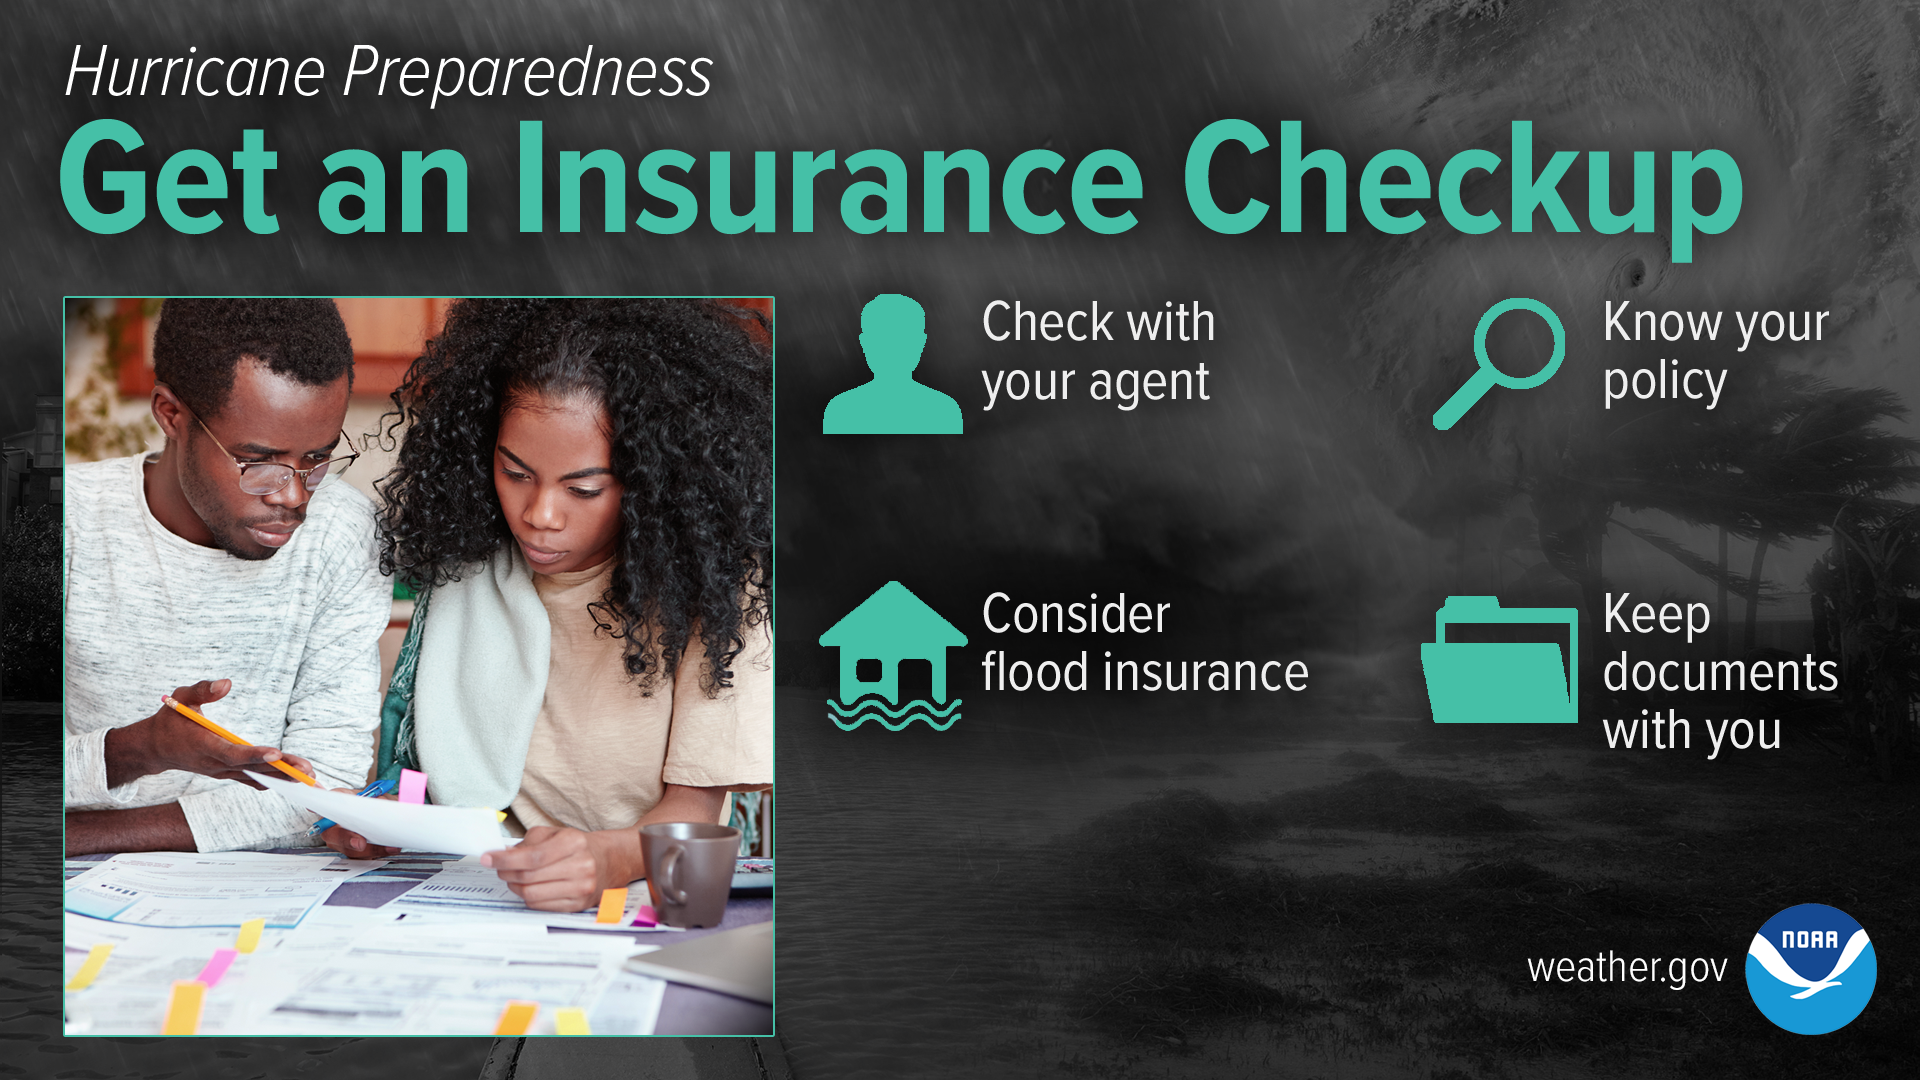 Hurricane Preparedness - Get an Insurance Checkup. Check with your agent. Know your policy. Consider flood insurance. Keep documents with you.